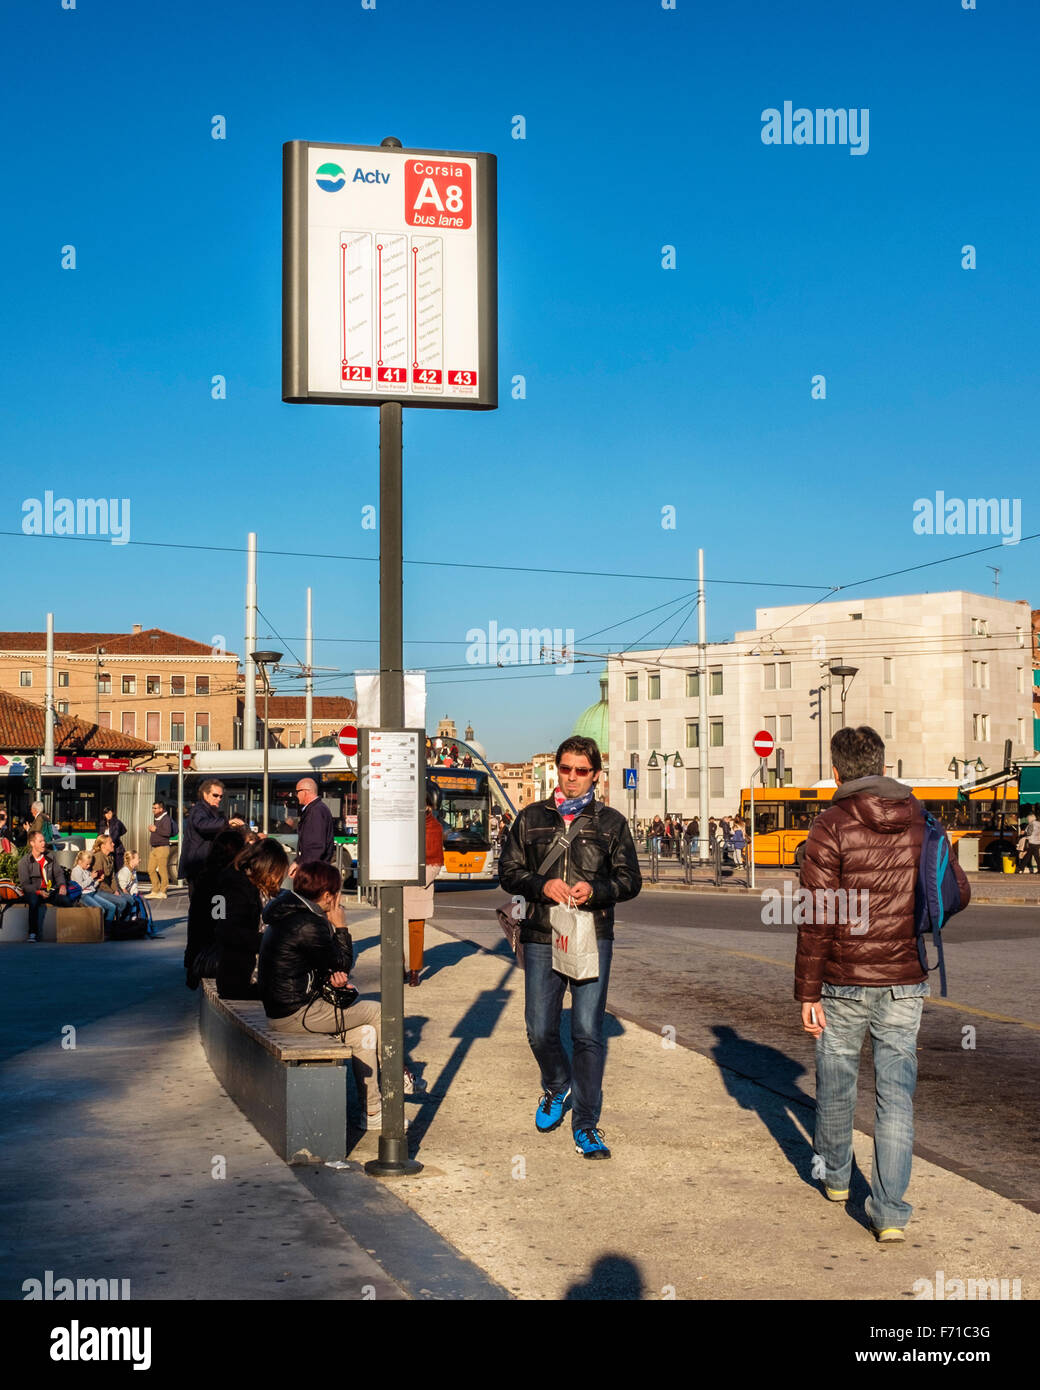 Venice, Italy. People waiting at the ACTV bus station at Piazzale Roma Stock Photo